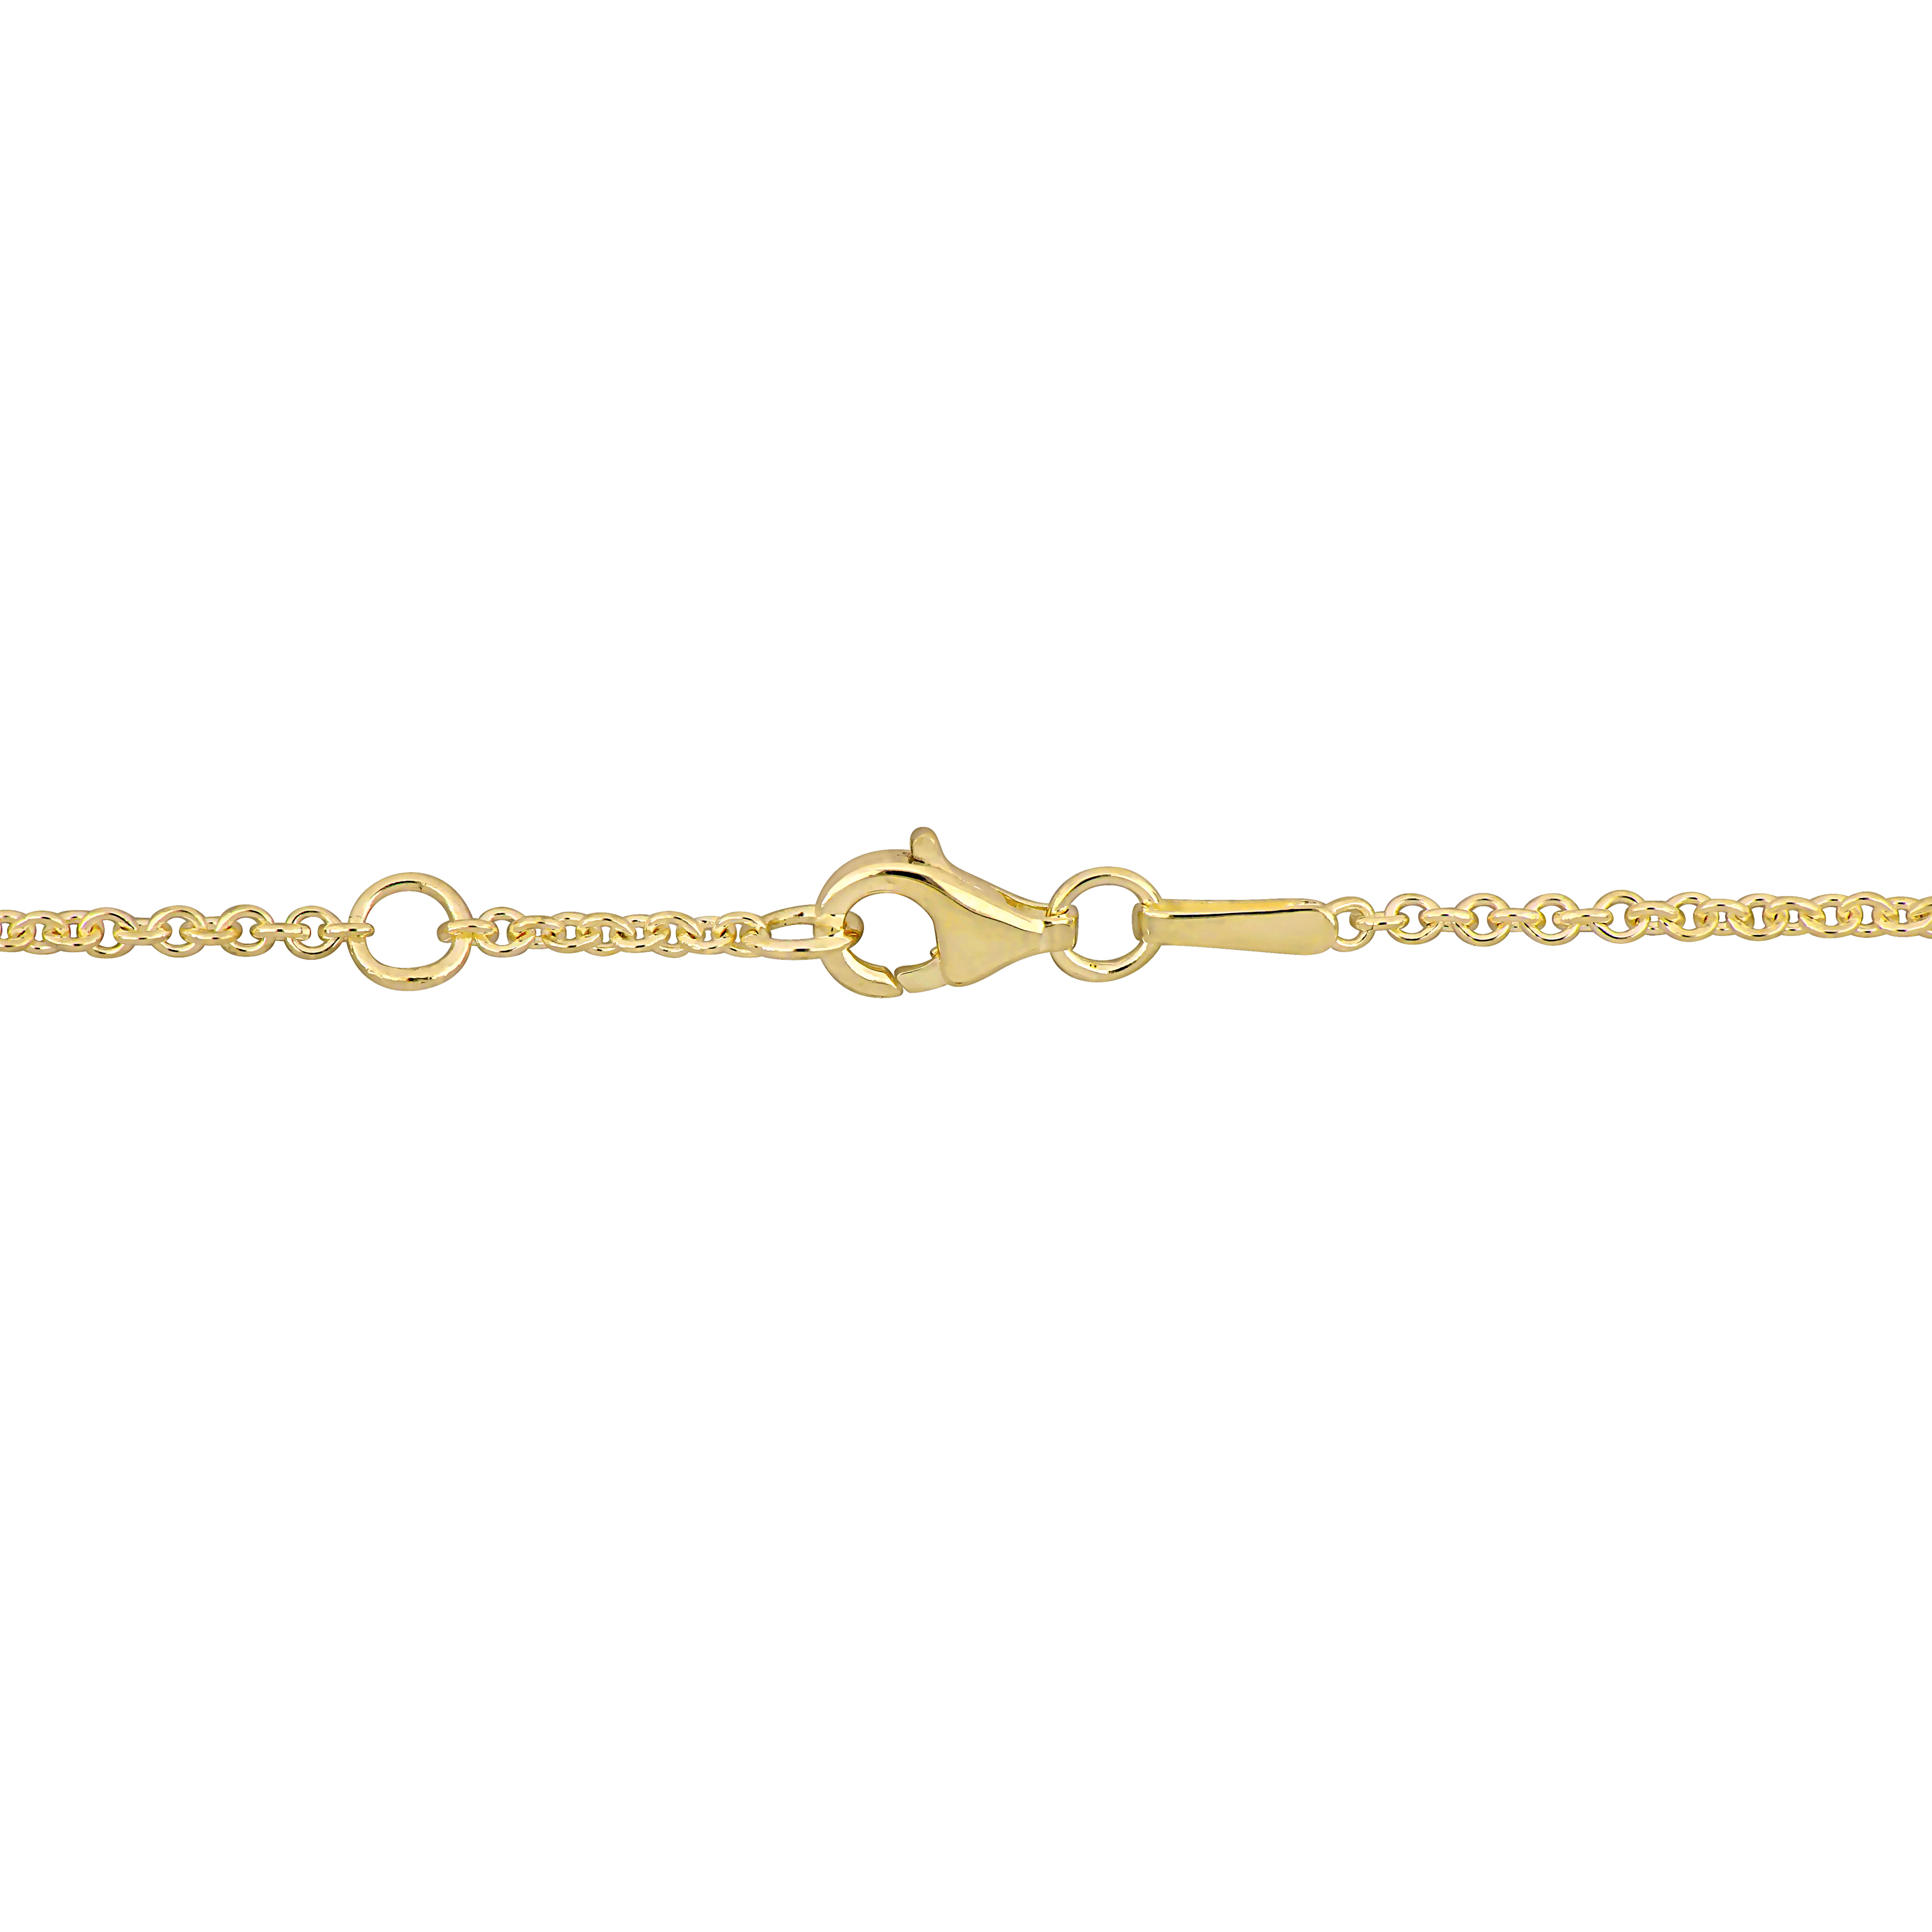 Heart And Key Charm Chain Bracelet in Yellow Plated Sterling Silver - 6.25 in.